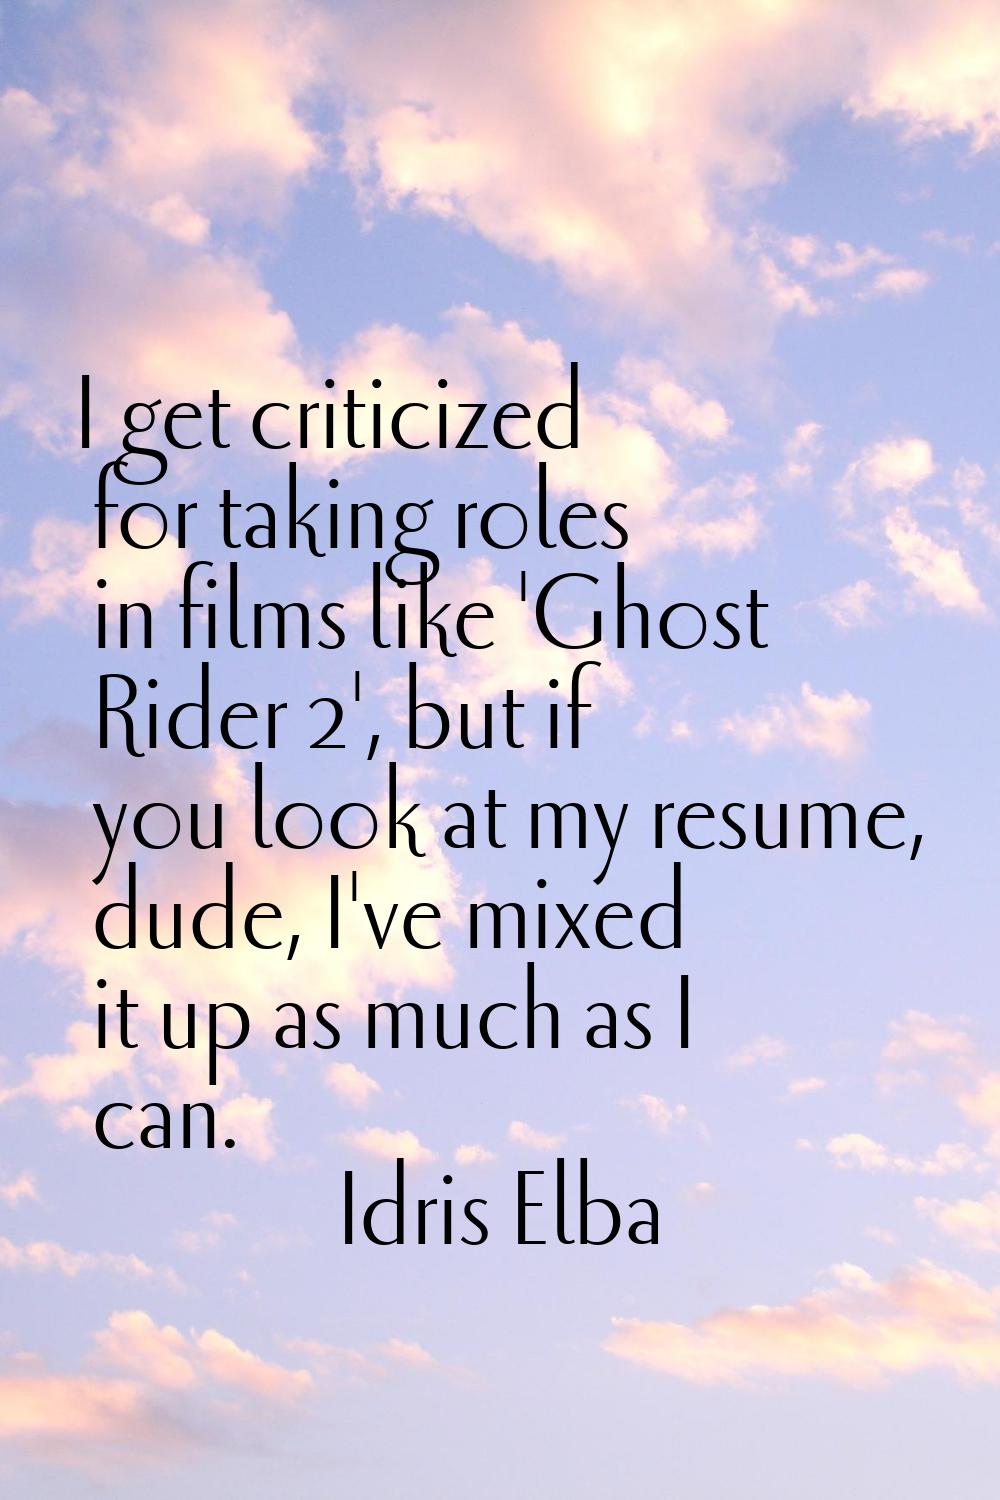 I get criticized for taking roles in films like 'Ghost Rider 2', but if you look at my resume, dude